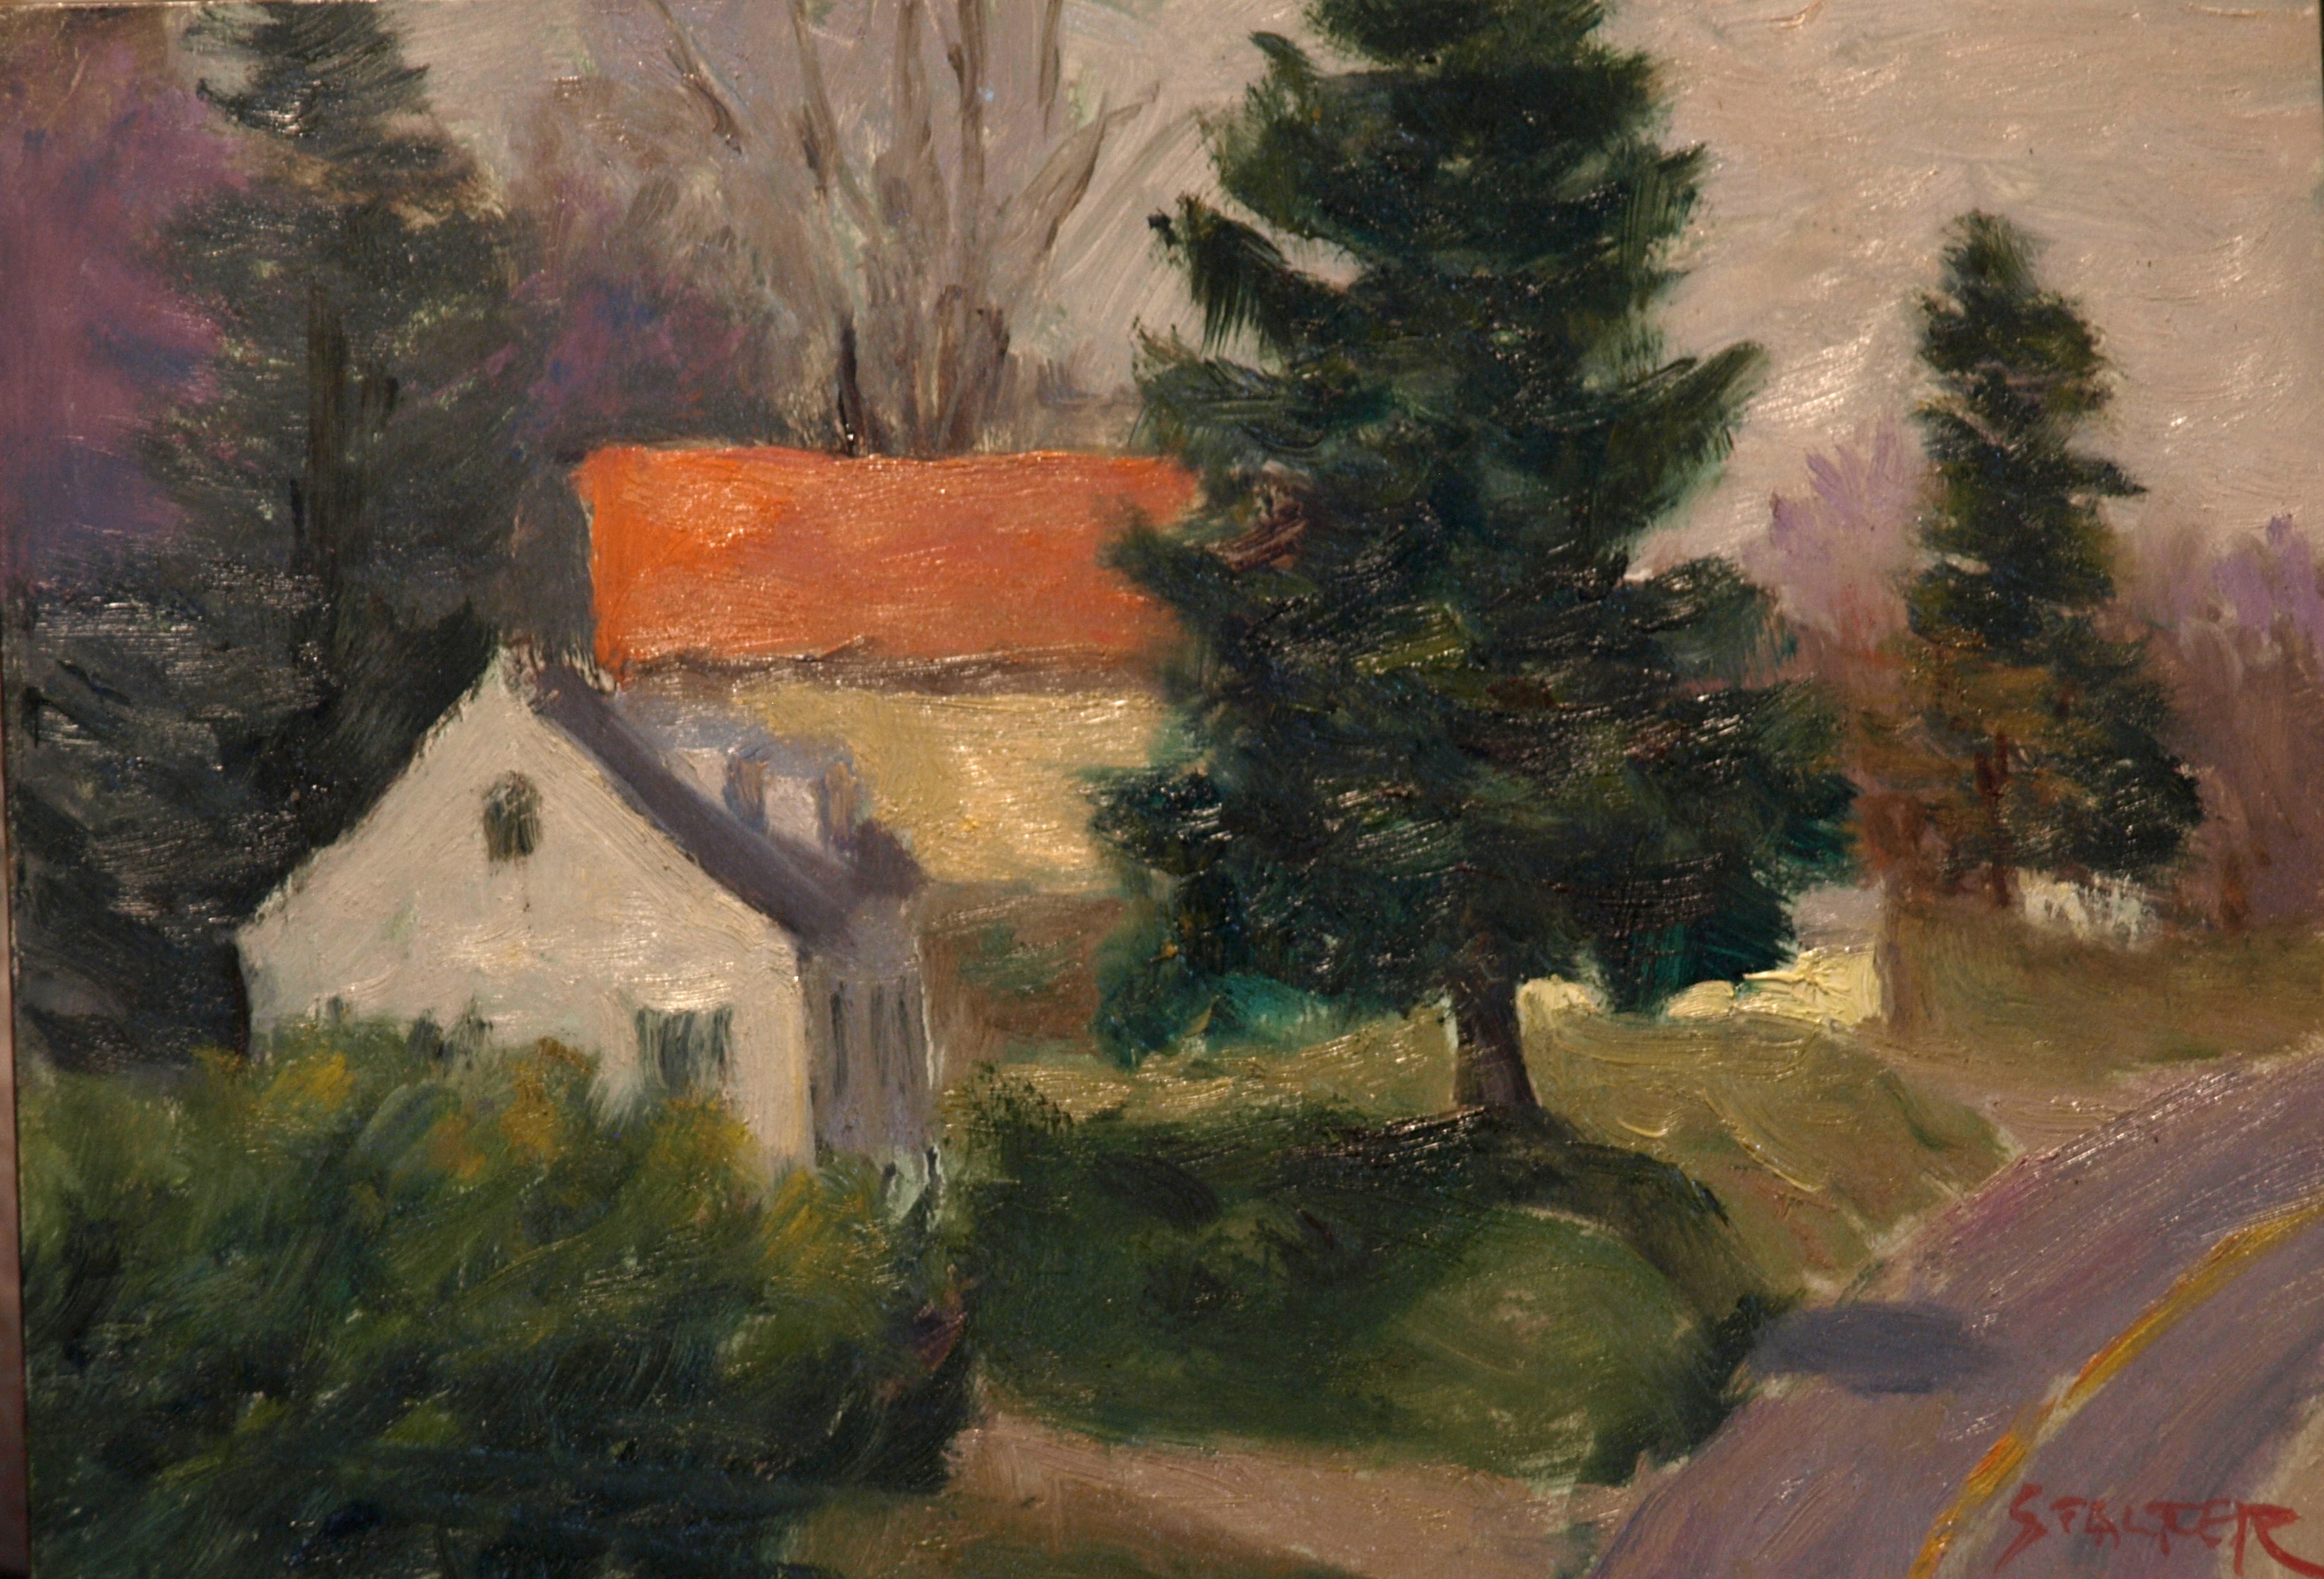 Wingdale, Oil on Canvas on Panel, 9 x 12 Inches, by Richard Stalter, $225